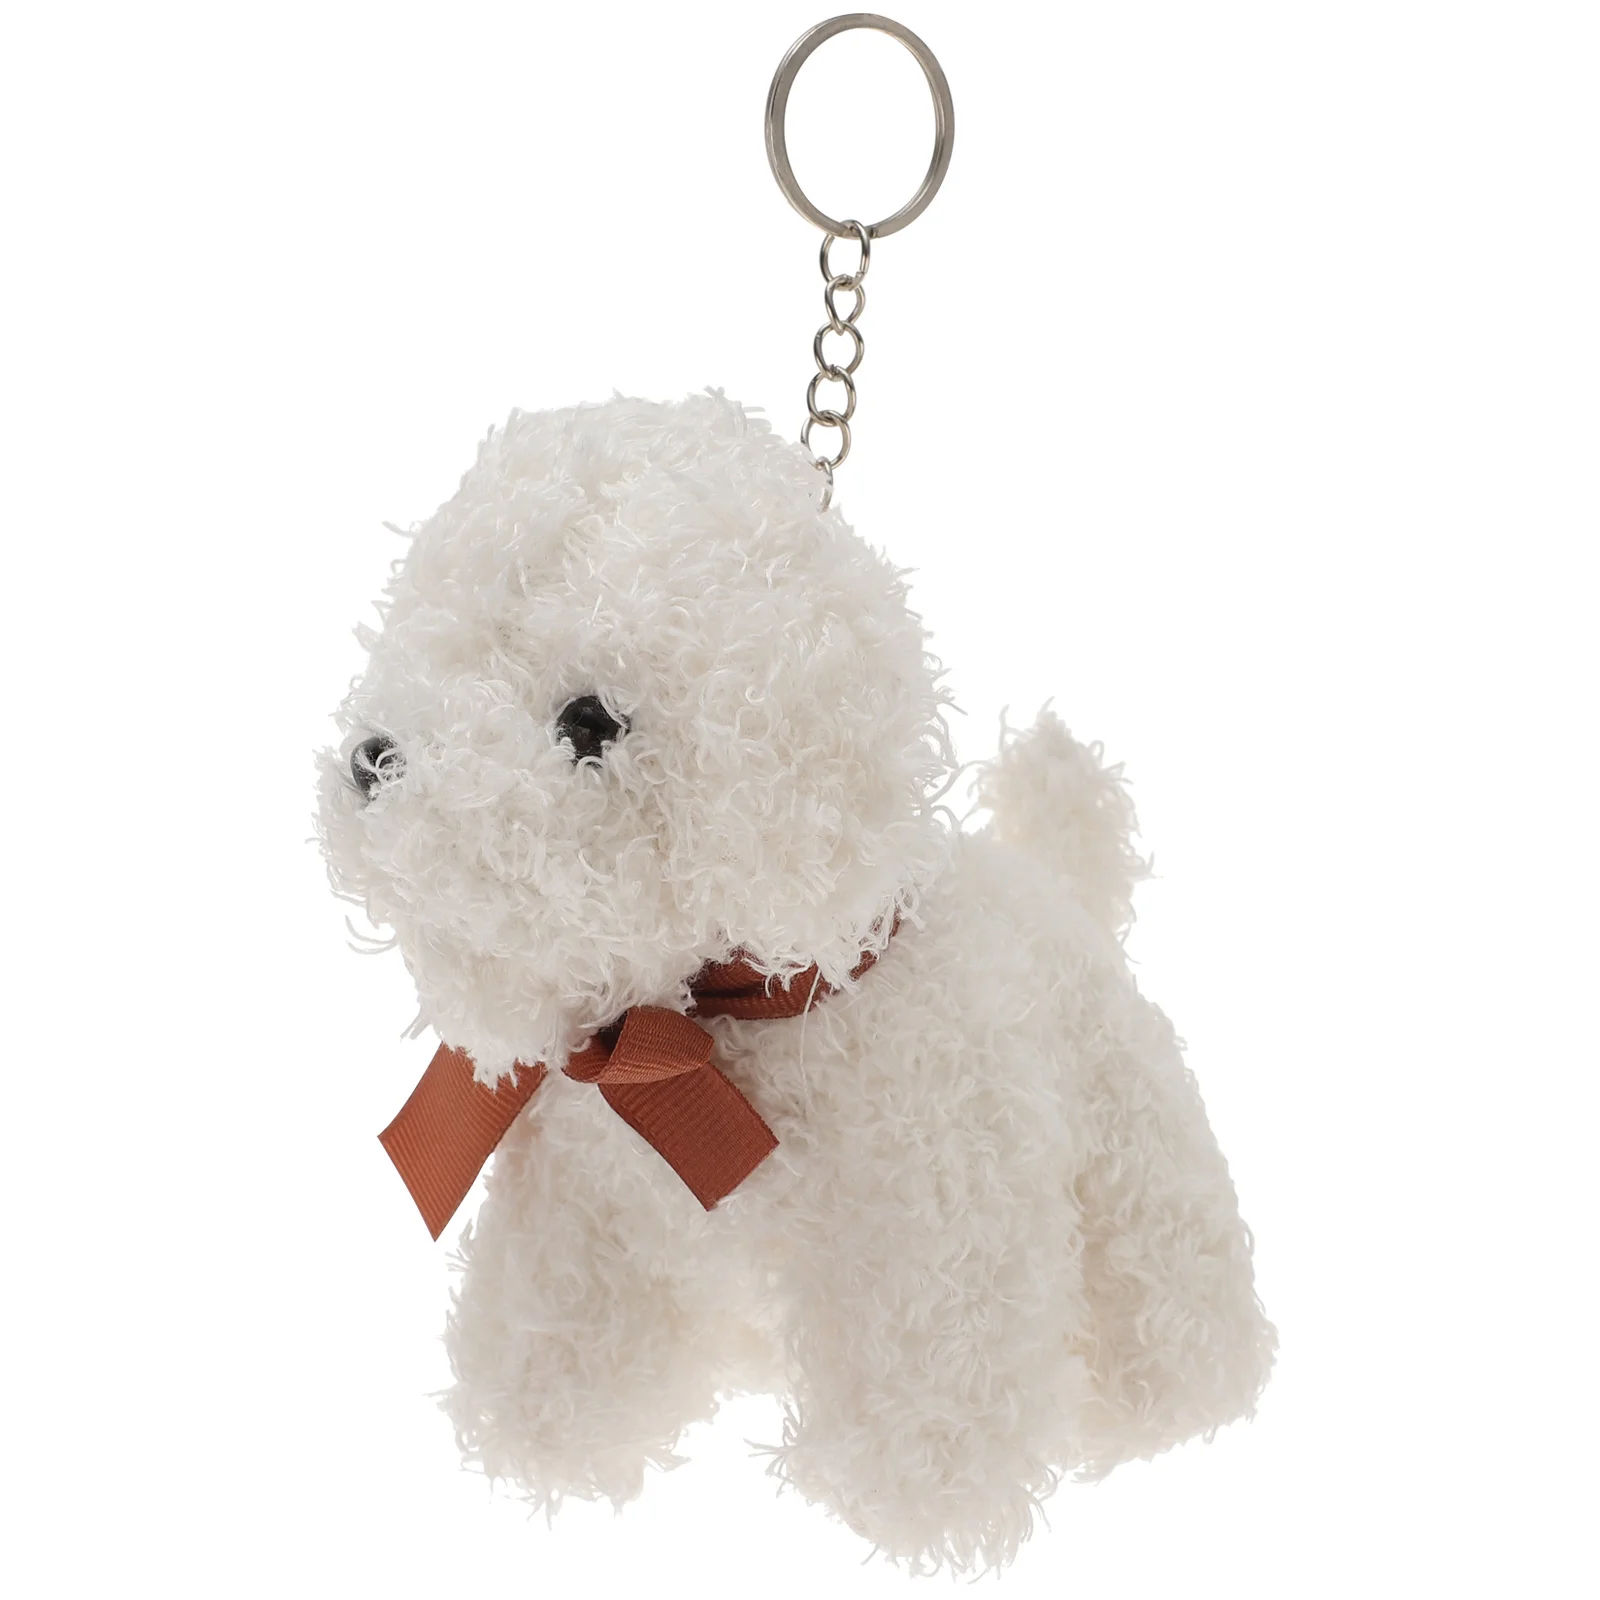 Dog Toy Keychain Ring Backpack Plush for Boys Animal Keychains Golden Retriever Rings oval crystal blank key rings blank thermal transfer printing keychains crystal keychain for heat transfer sublimation printing